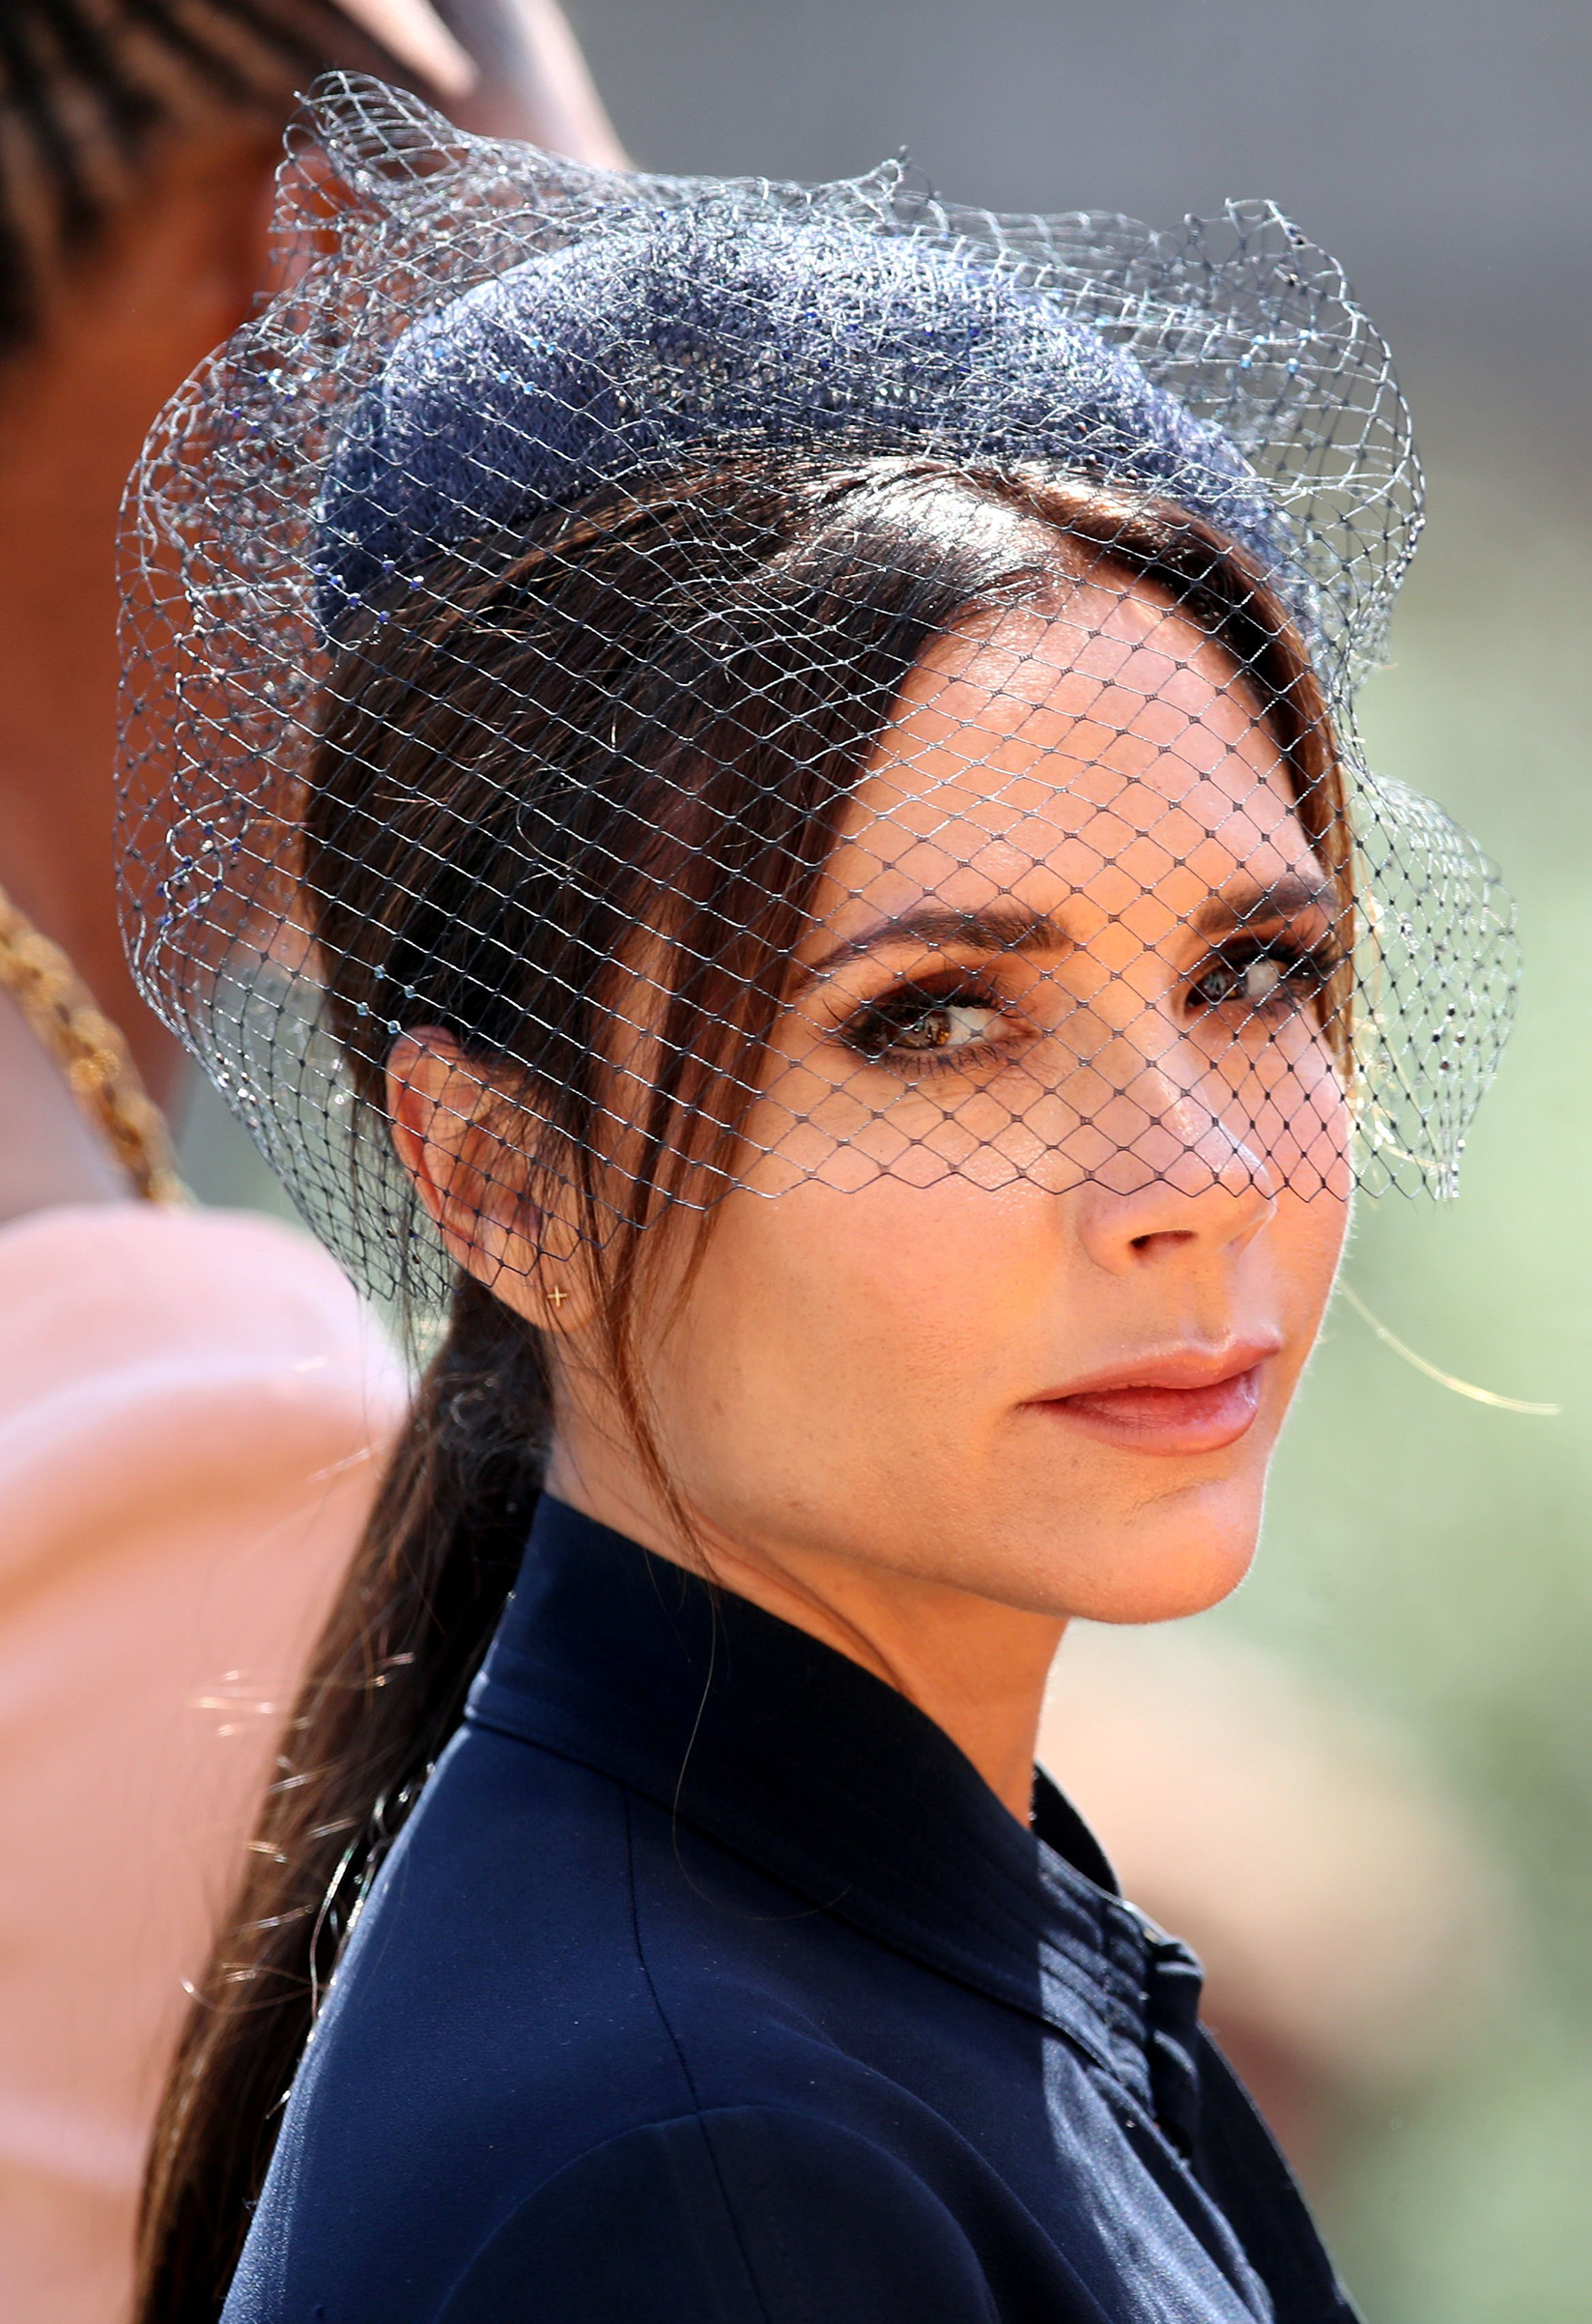 Victoria Beckham leaves St George's Chapel at Windsor Castle after the wedding of Meghan Markle and Prince Harry, May 19, 2018. (Chris Radburn—Pool/Reuters)